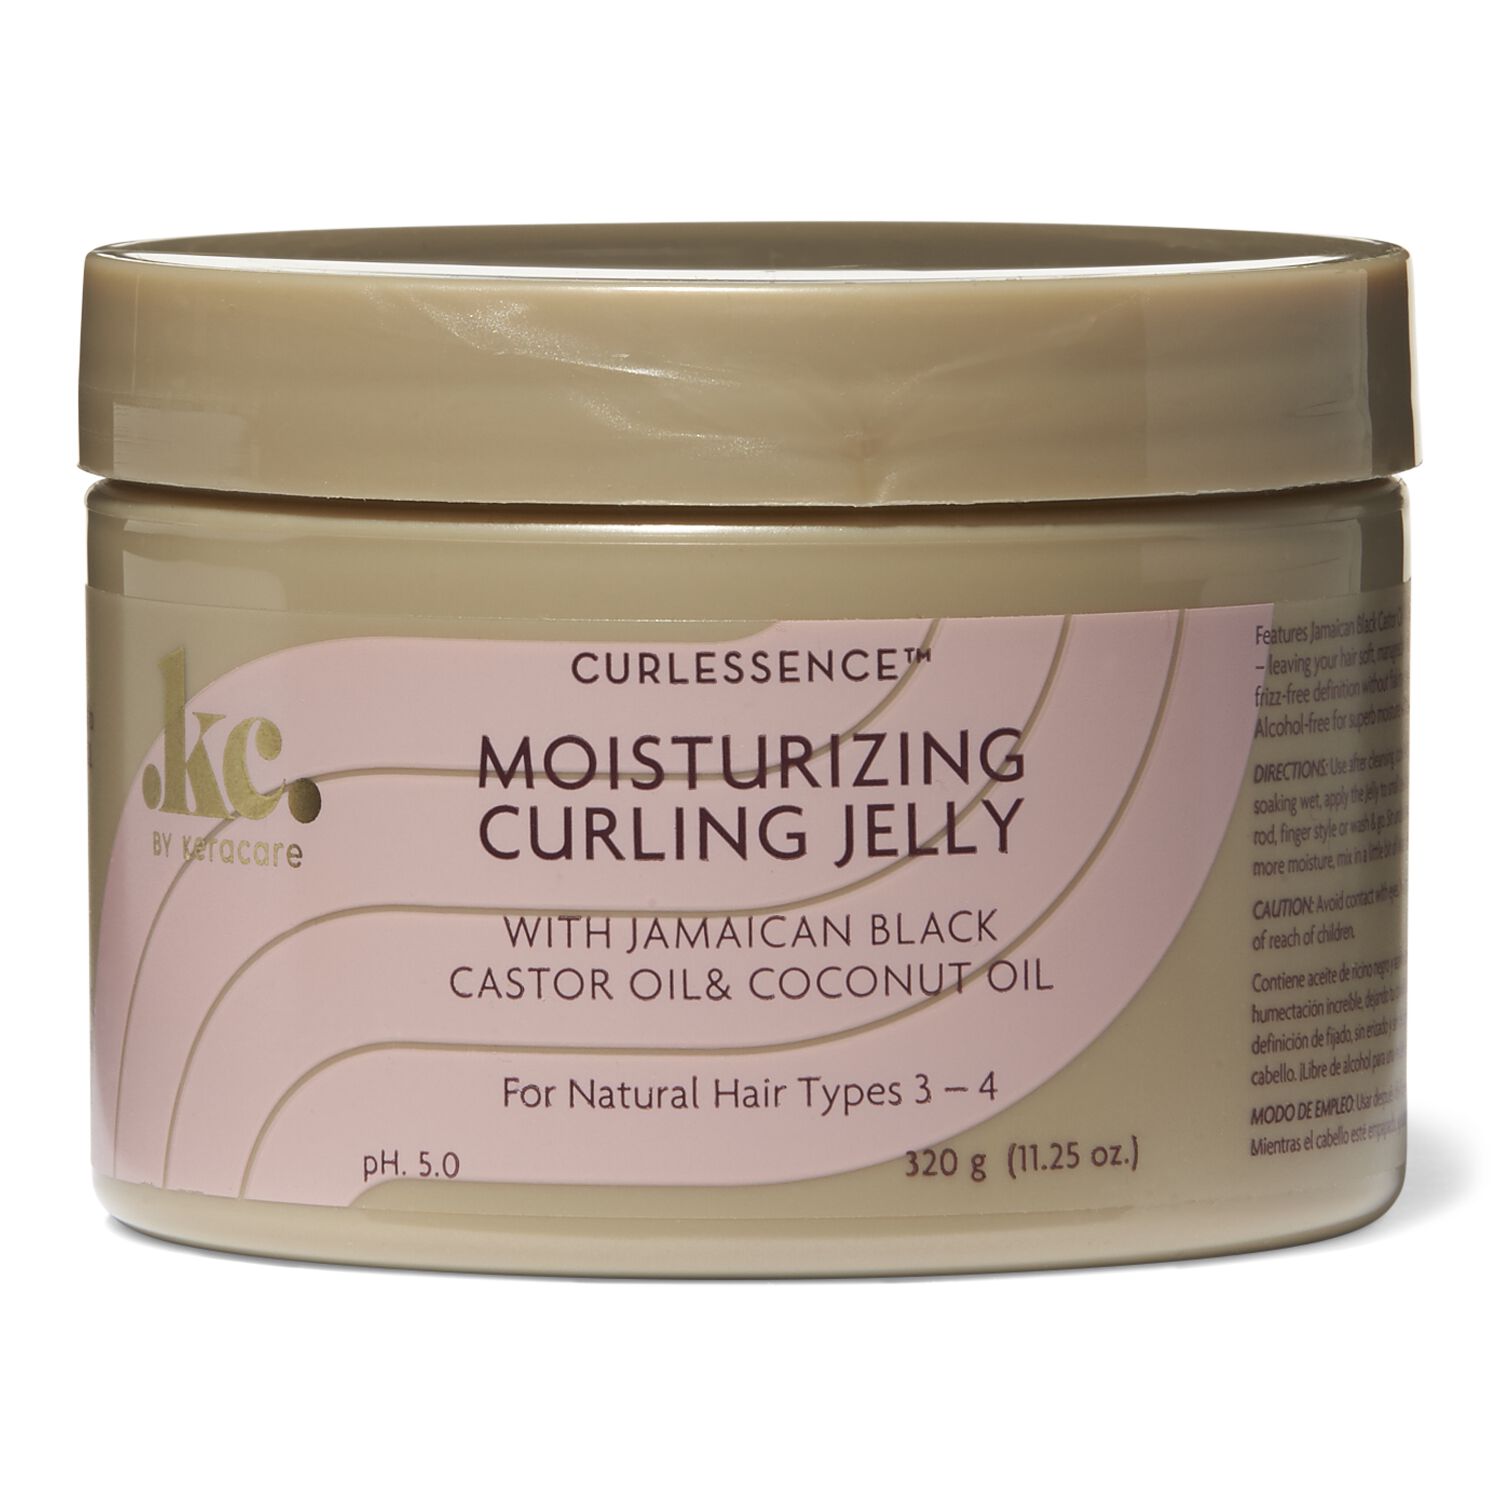 Moisturizing Curling Jelly by Curlessence from Keracare | Styling ...